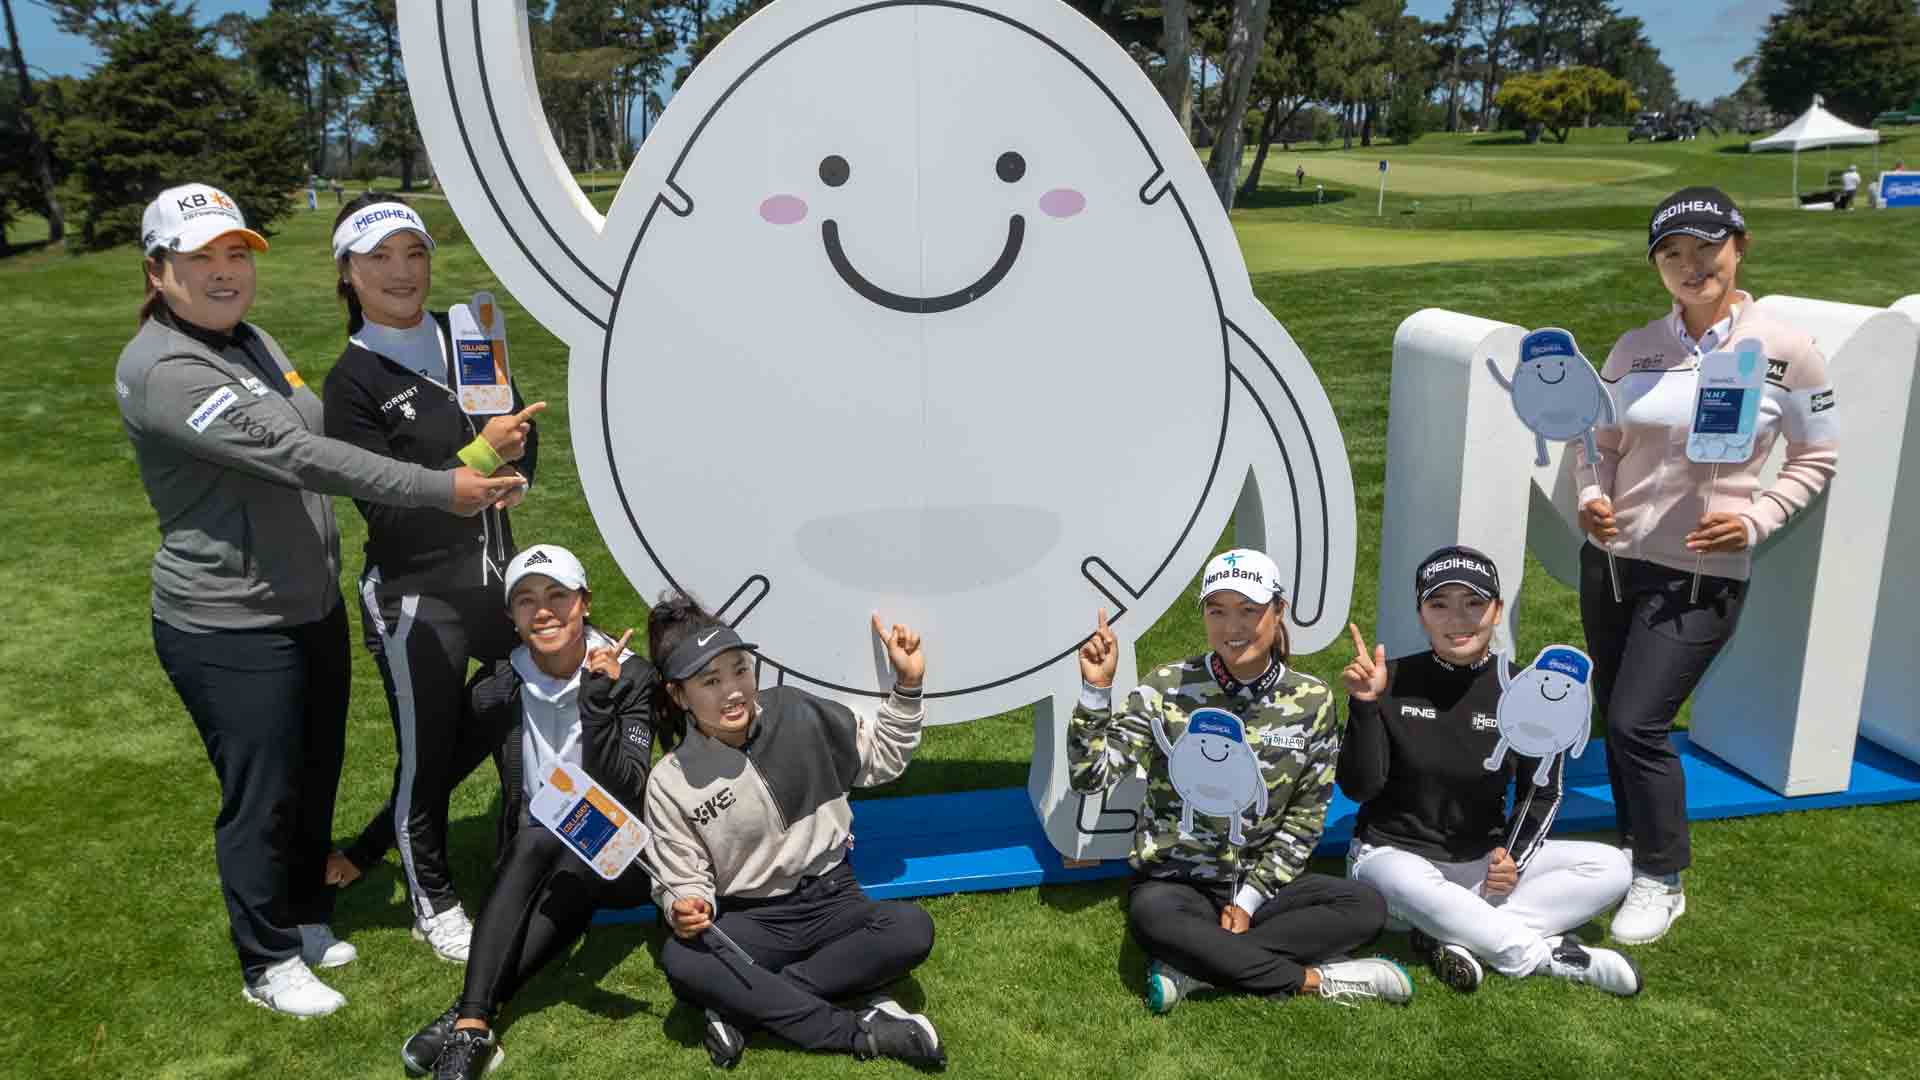 Players during a photo call ahead of the LPGA MEDIHEAL Championship